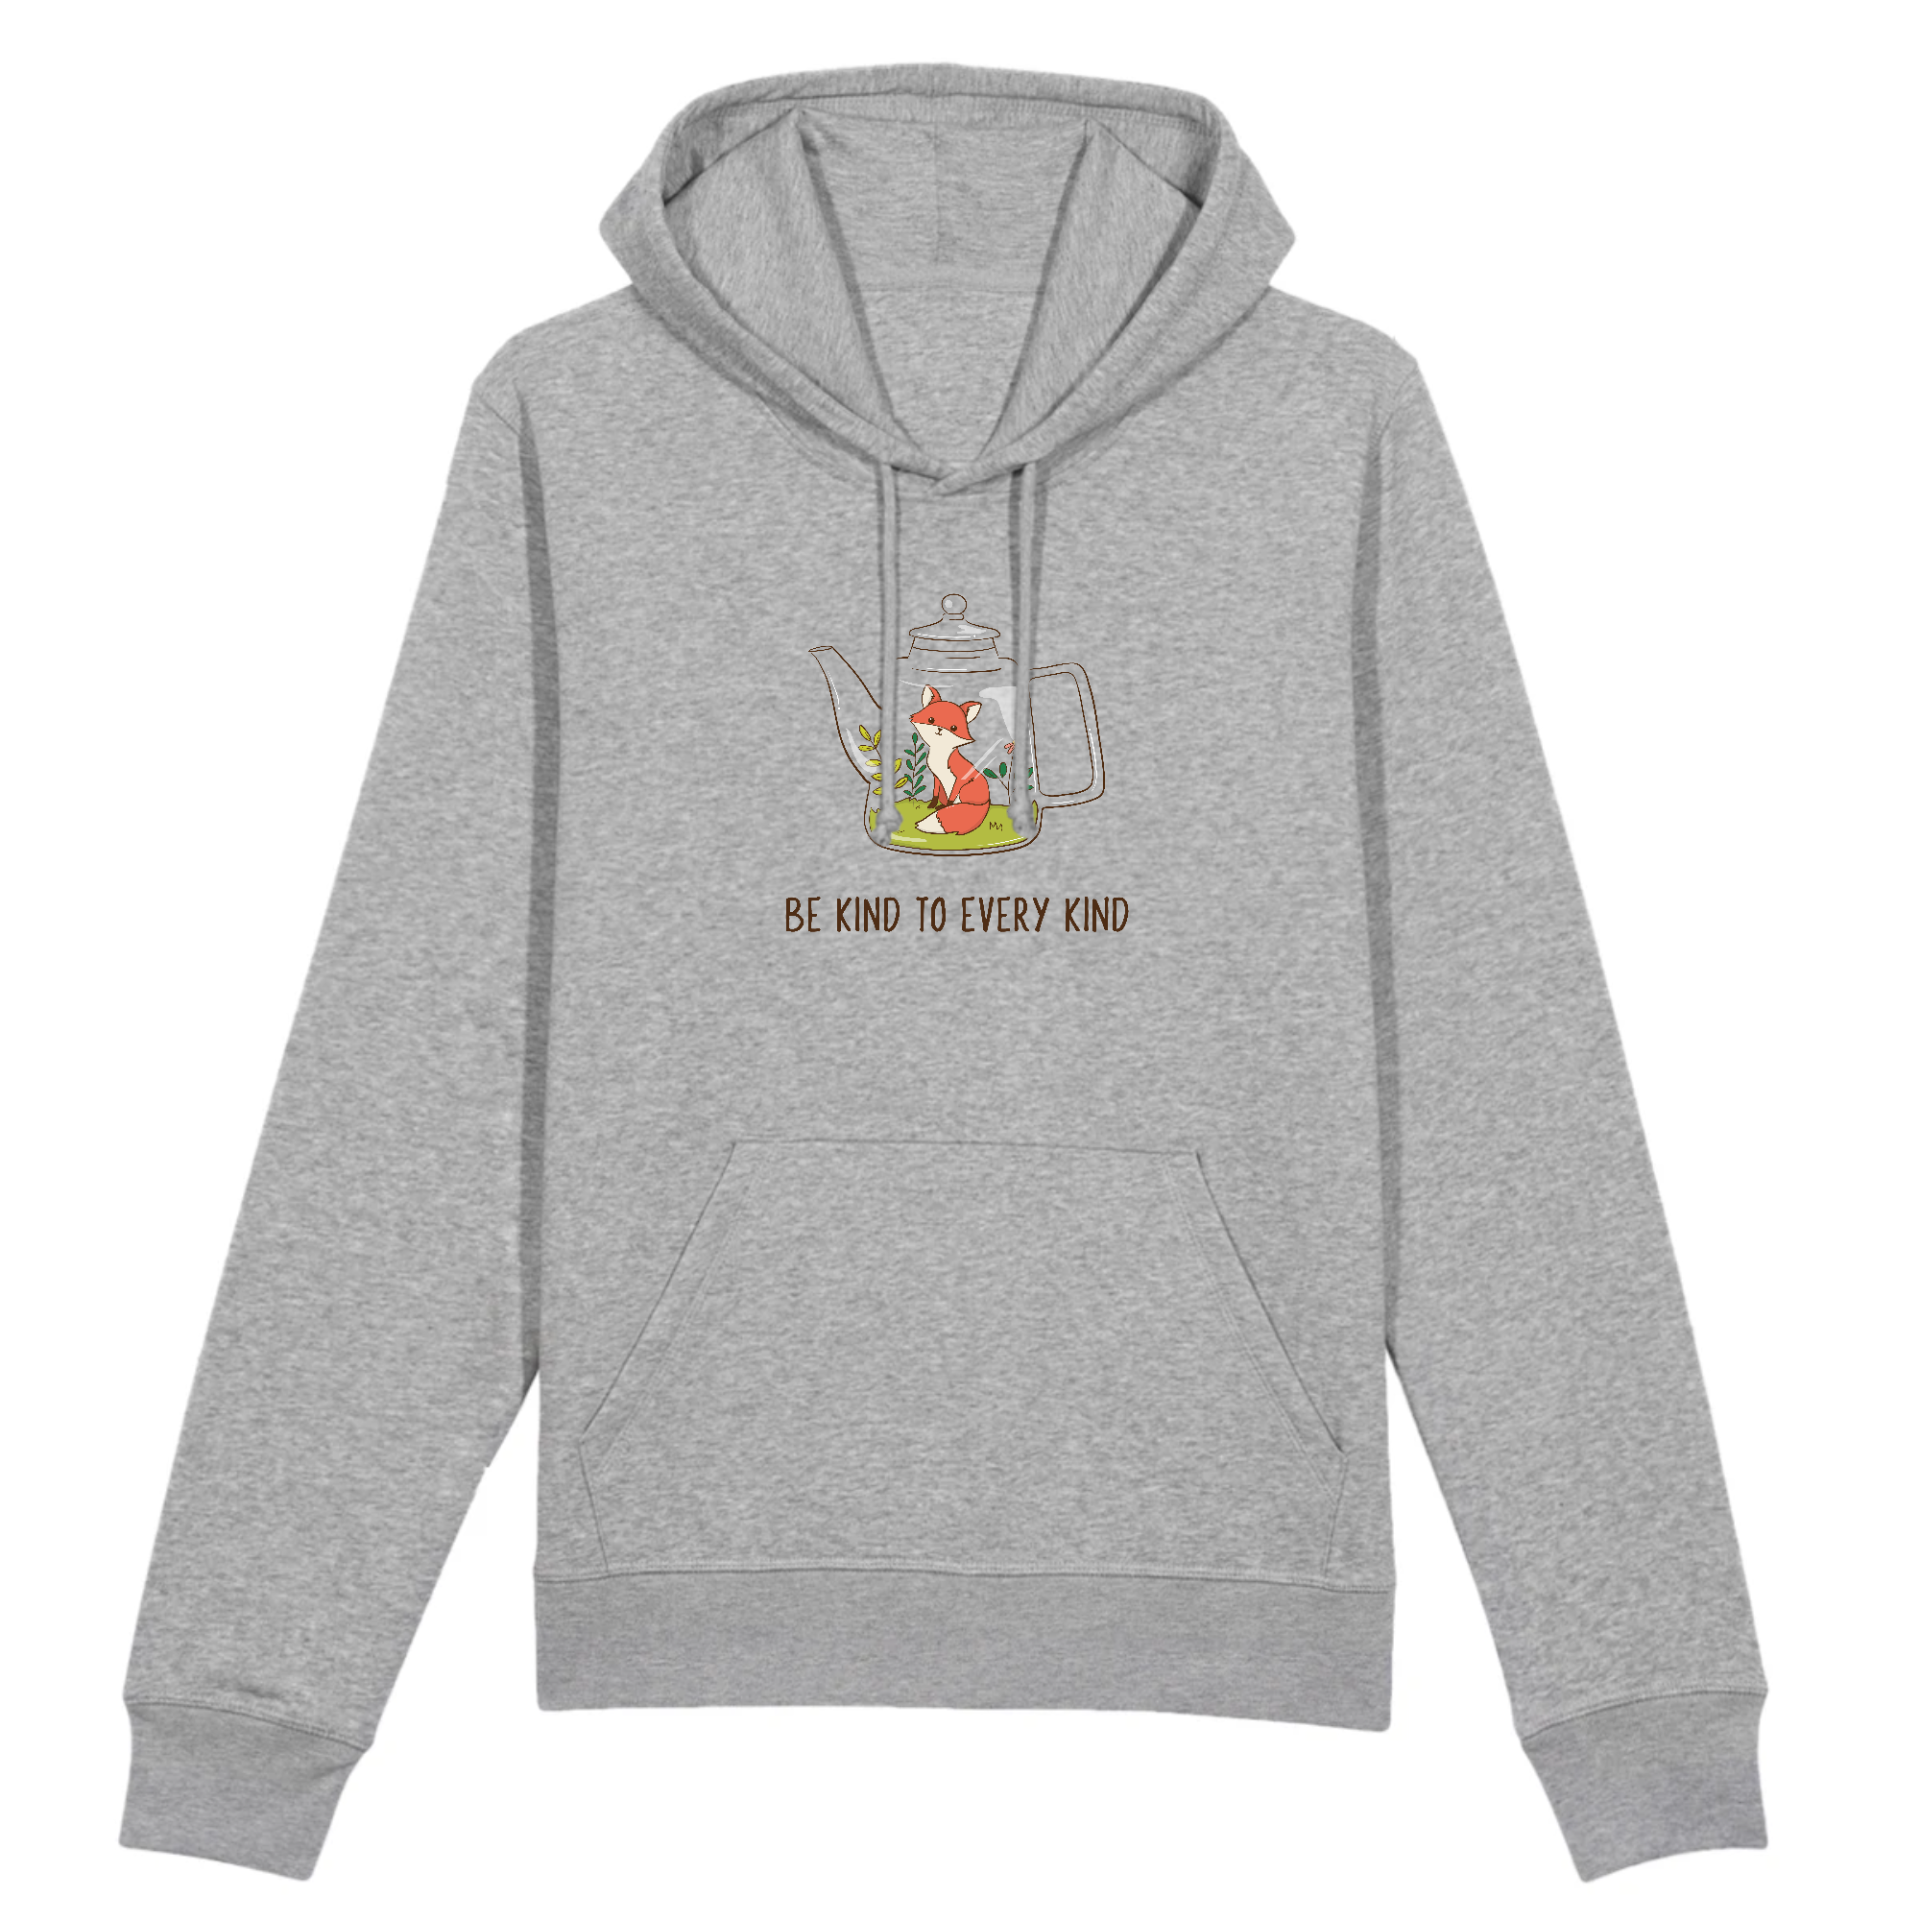 Printed Women´s and Men´s Organic Cotton Hoodie - Be Kind to Every Kind